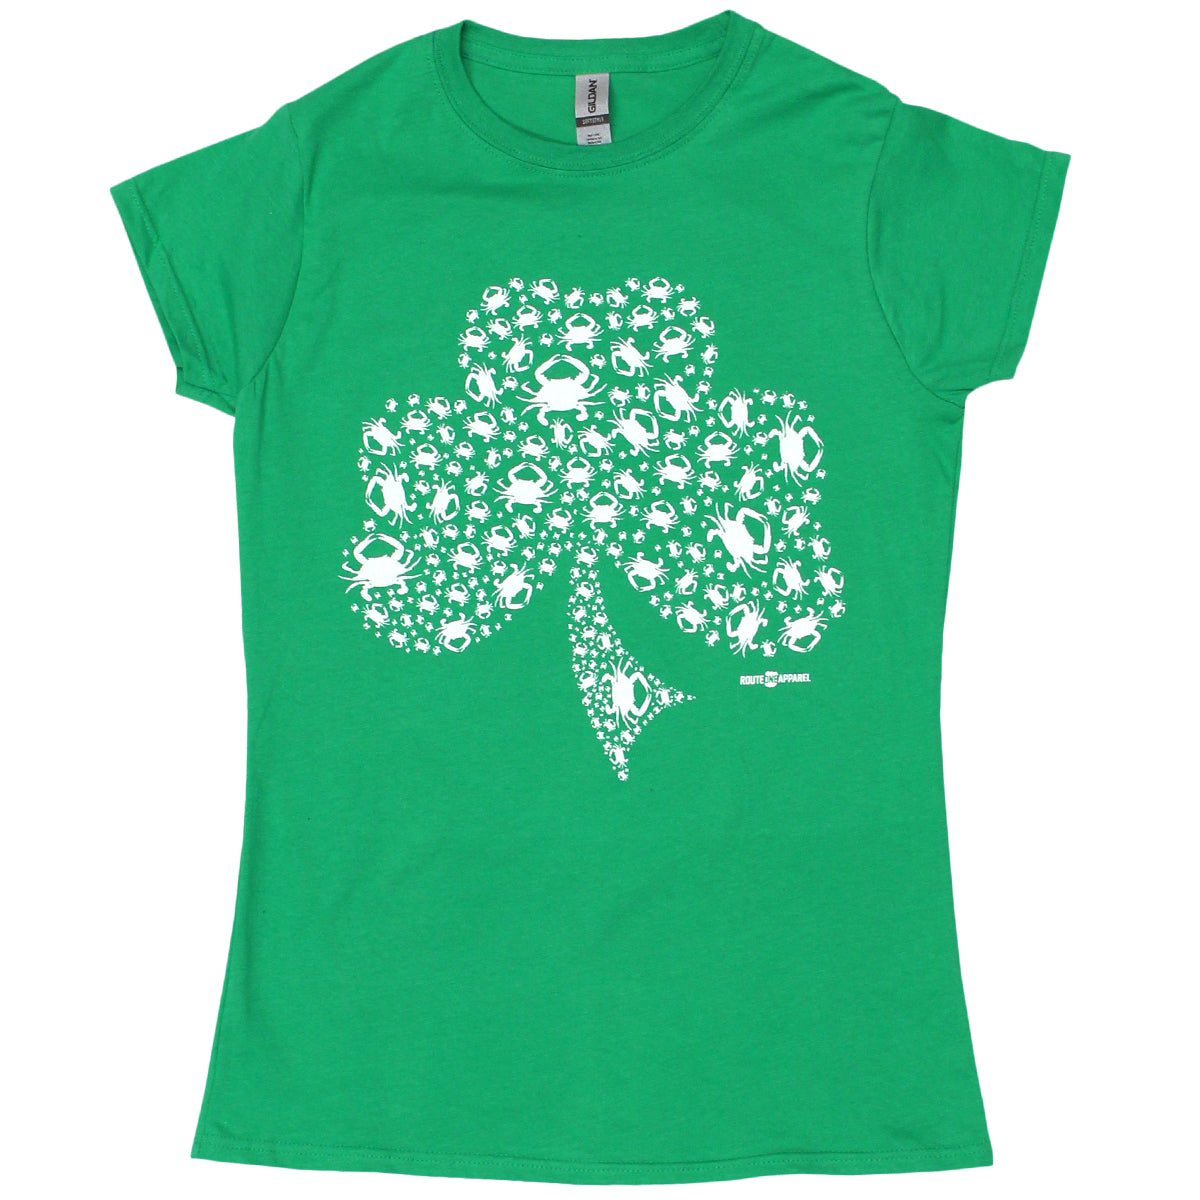 30 Percent Off St. Patrick's Day! Use Code: LUCKY23